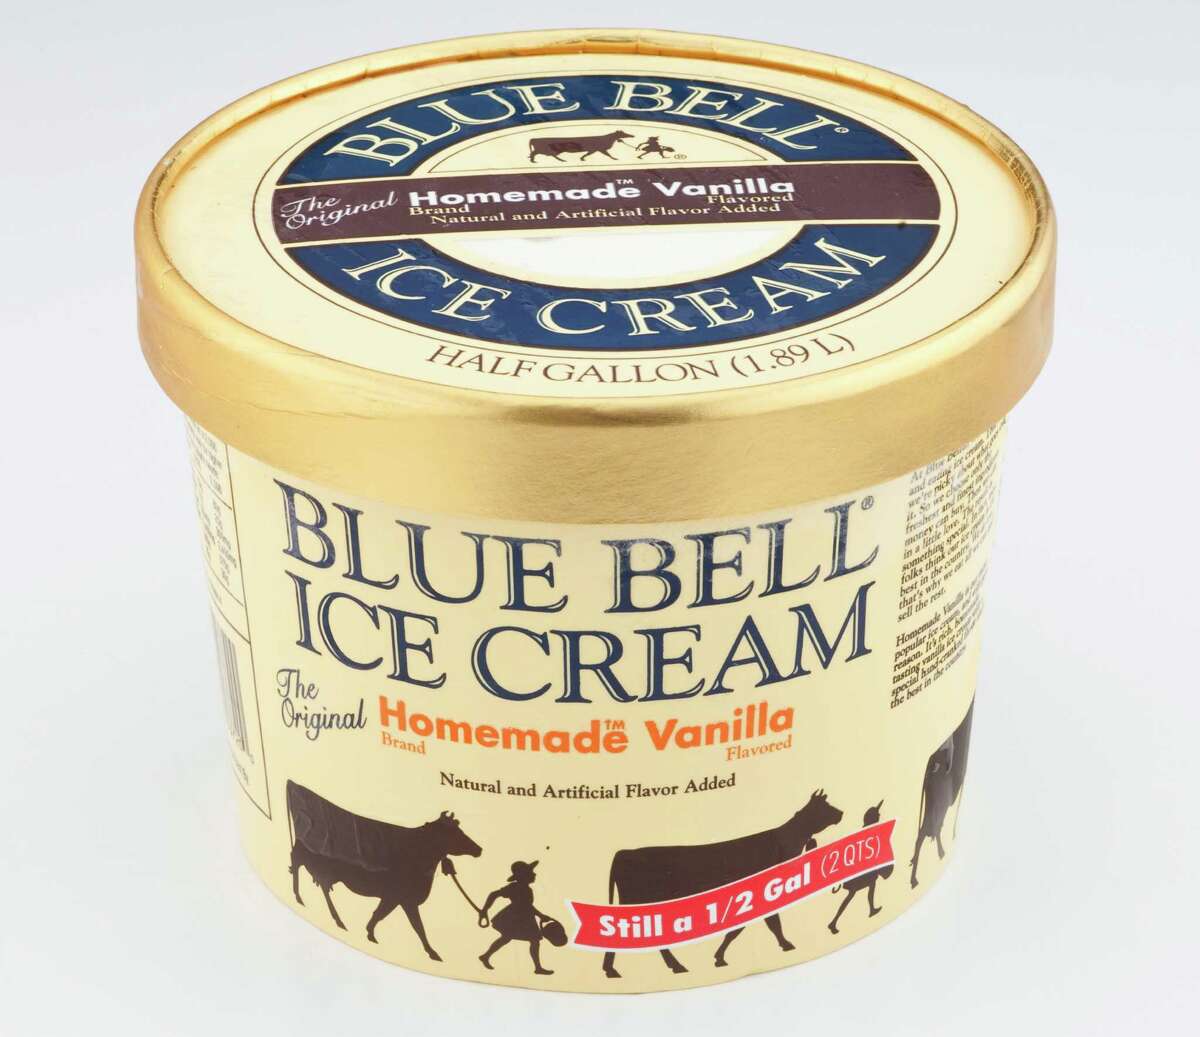 Blue Bell Ice Cream Home Made Vanilla. Photographed Tuesday, June 28, 2011, in the Chronicle studio in Houston.